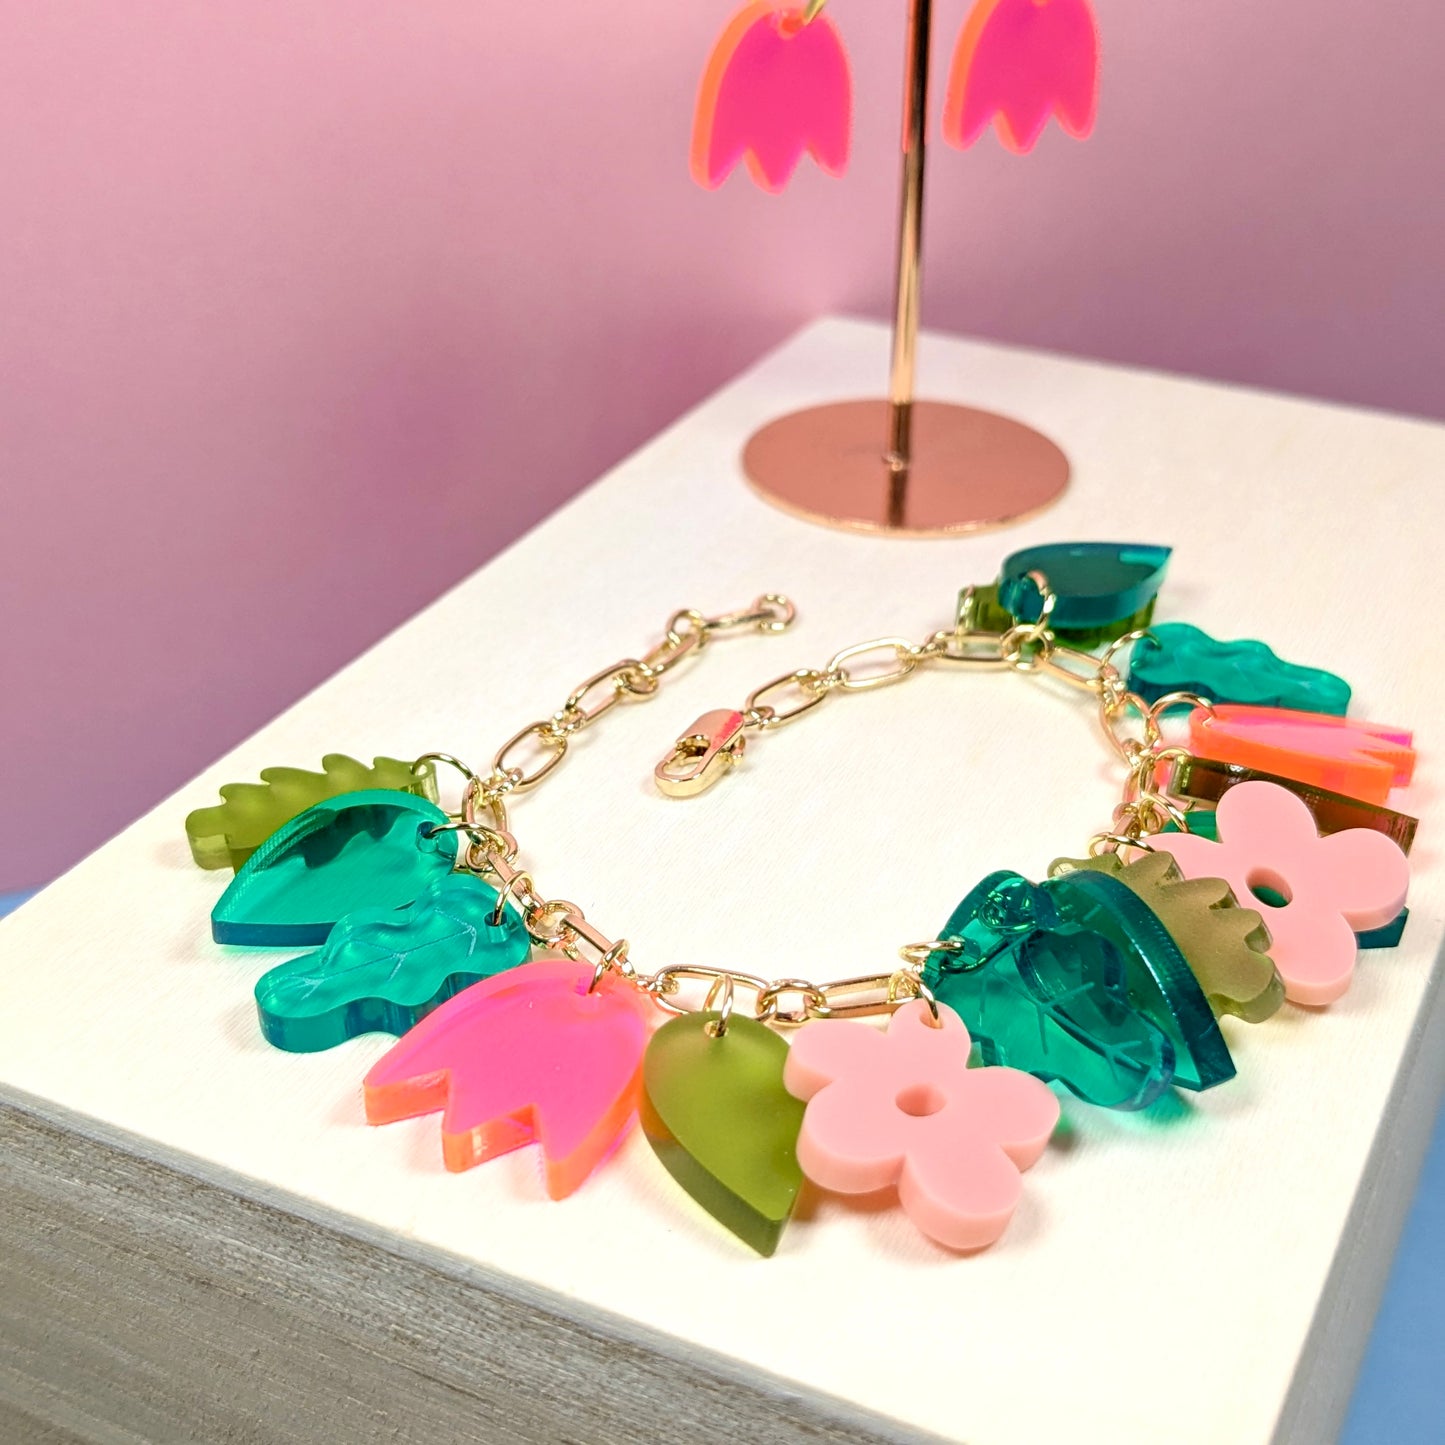 Workshop - Charming Floral Jewelry